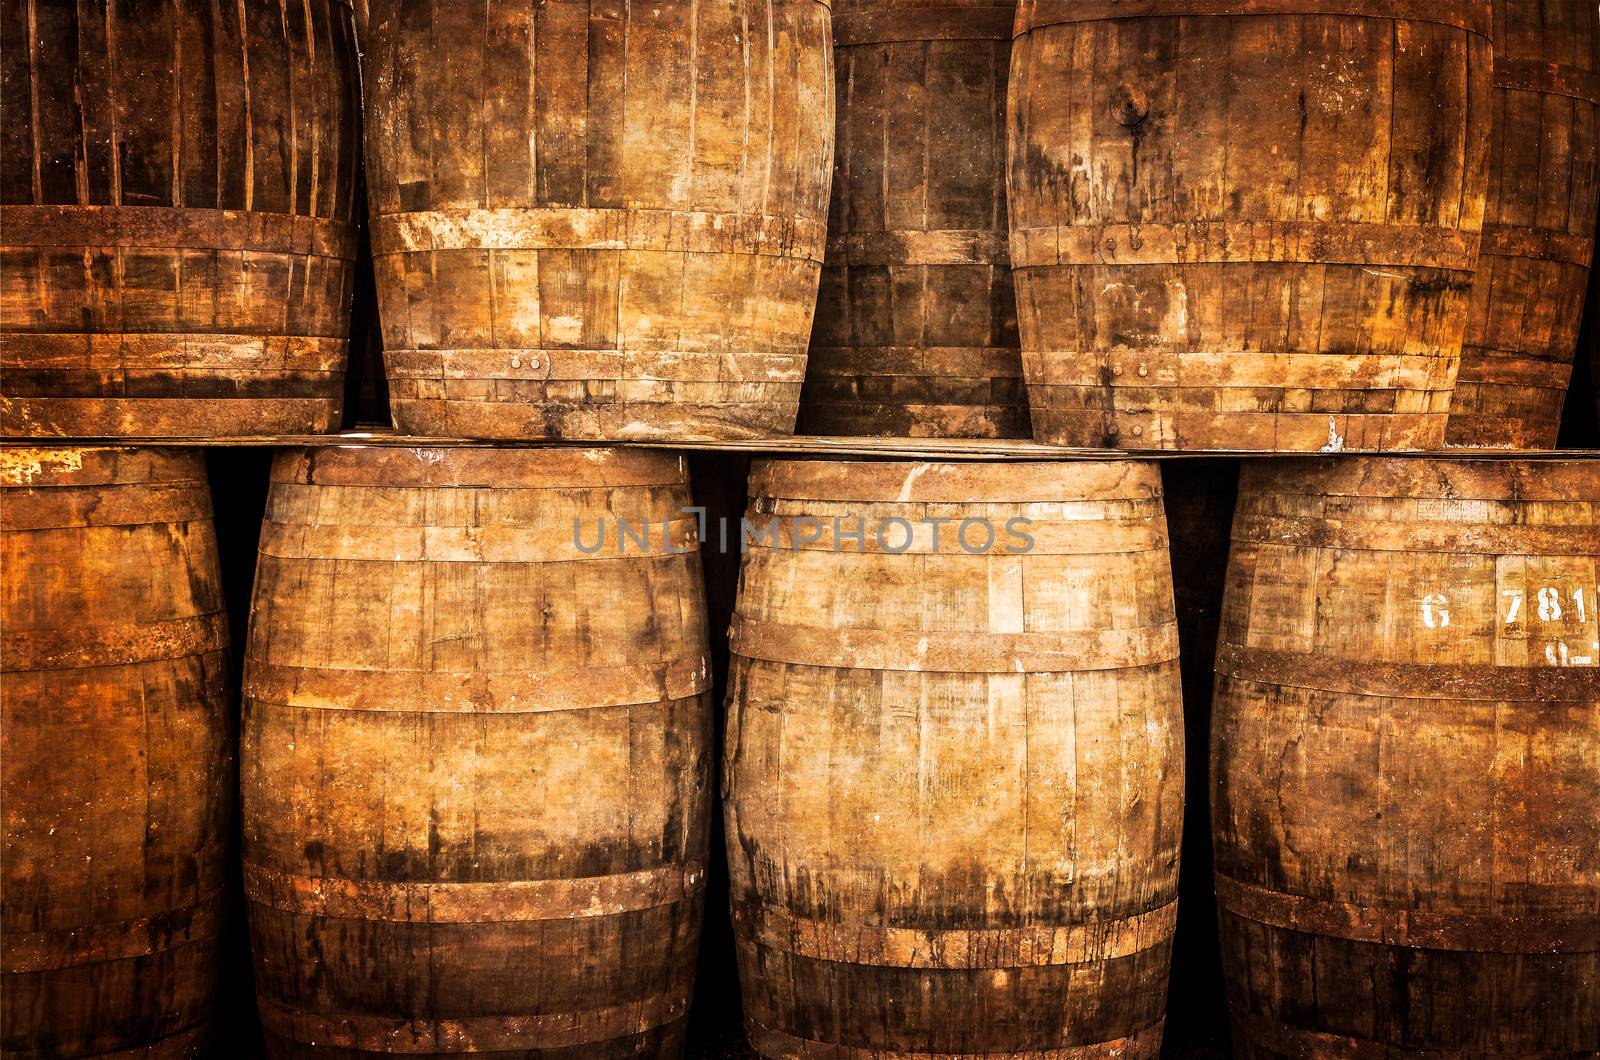 Stacked whisky barrels in vintage style by martinm303